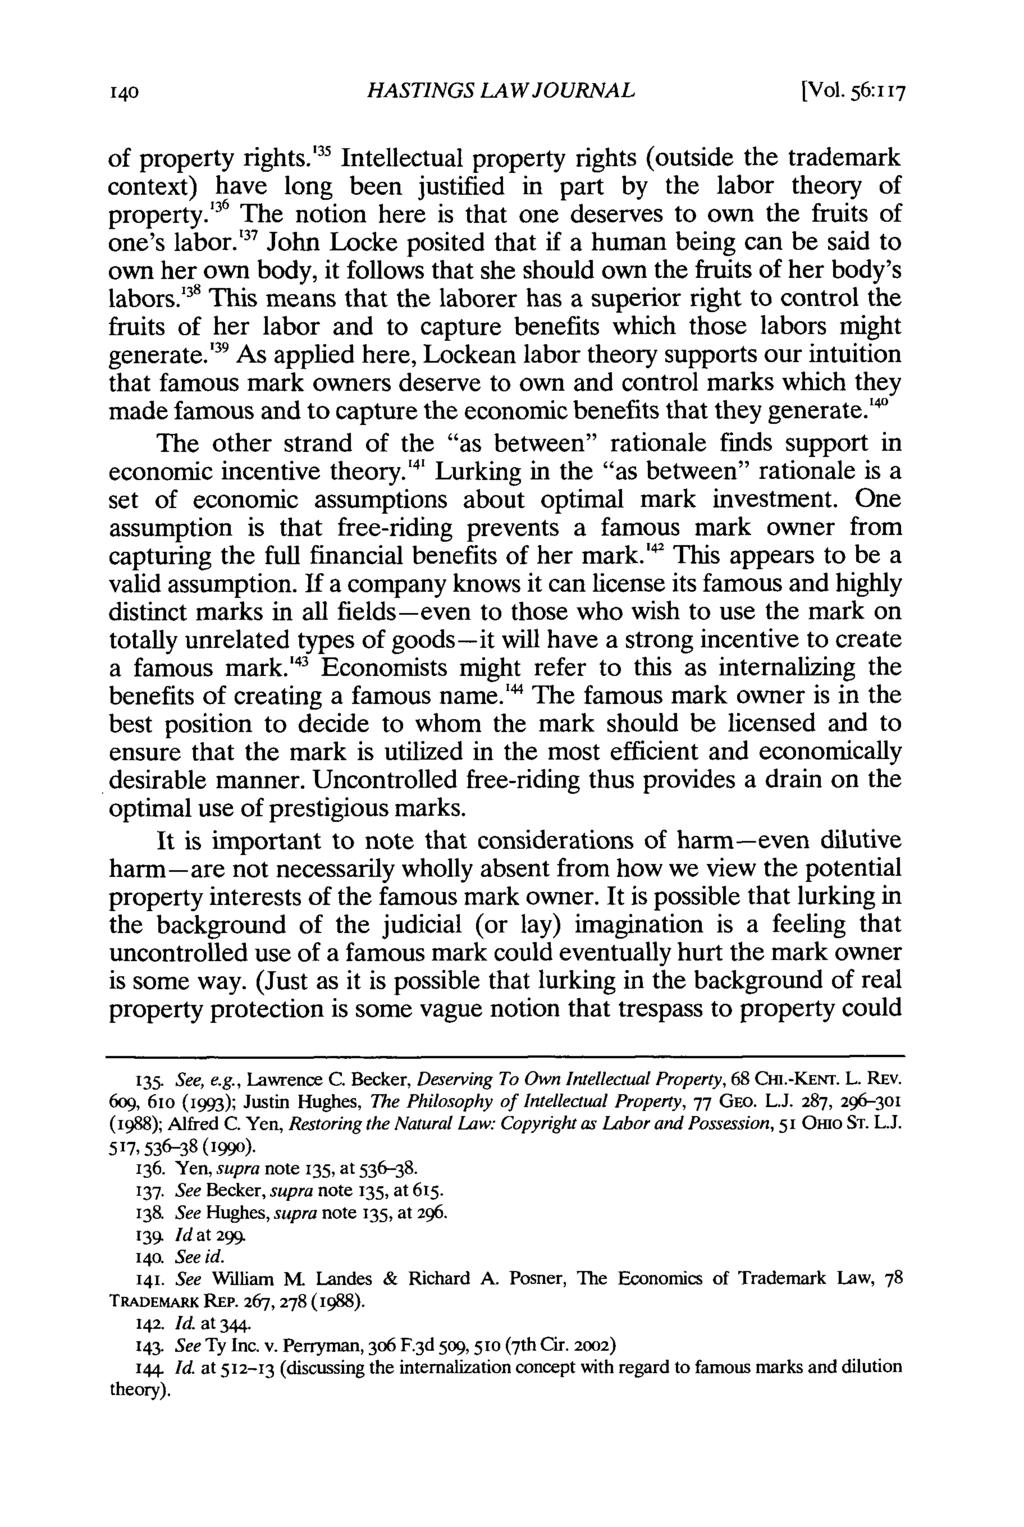 HASTINGS LAW JOURNAL [Vol. 56: 117 of property rights.' 35 Intellectual property rights (outside the trademark context) have long been justified in part by the labor theory of property.